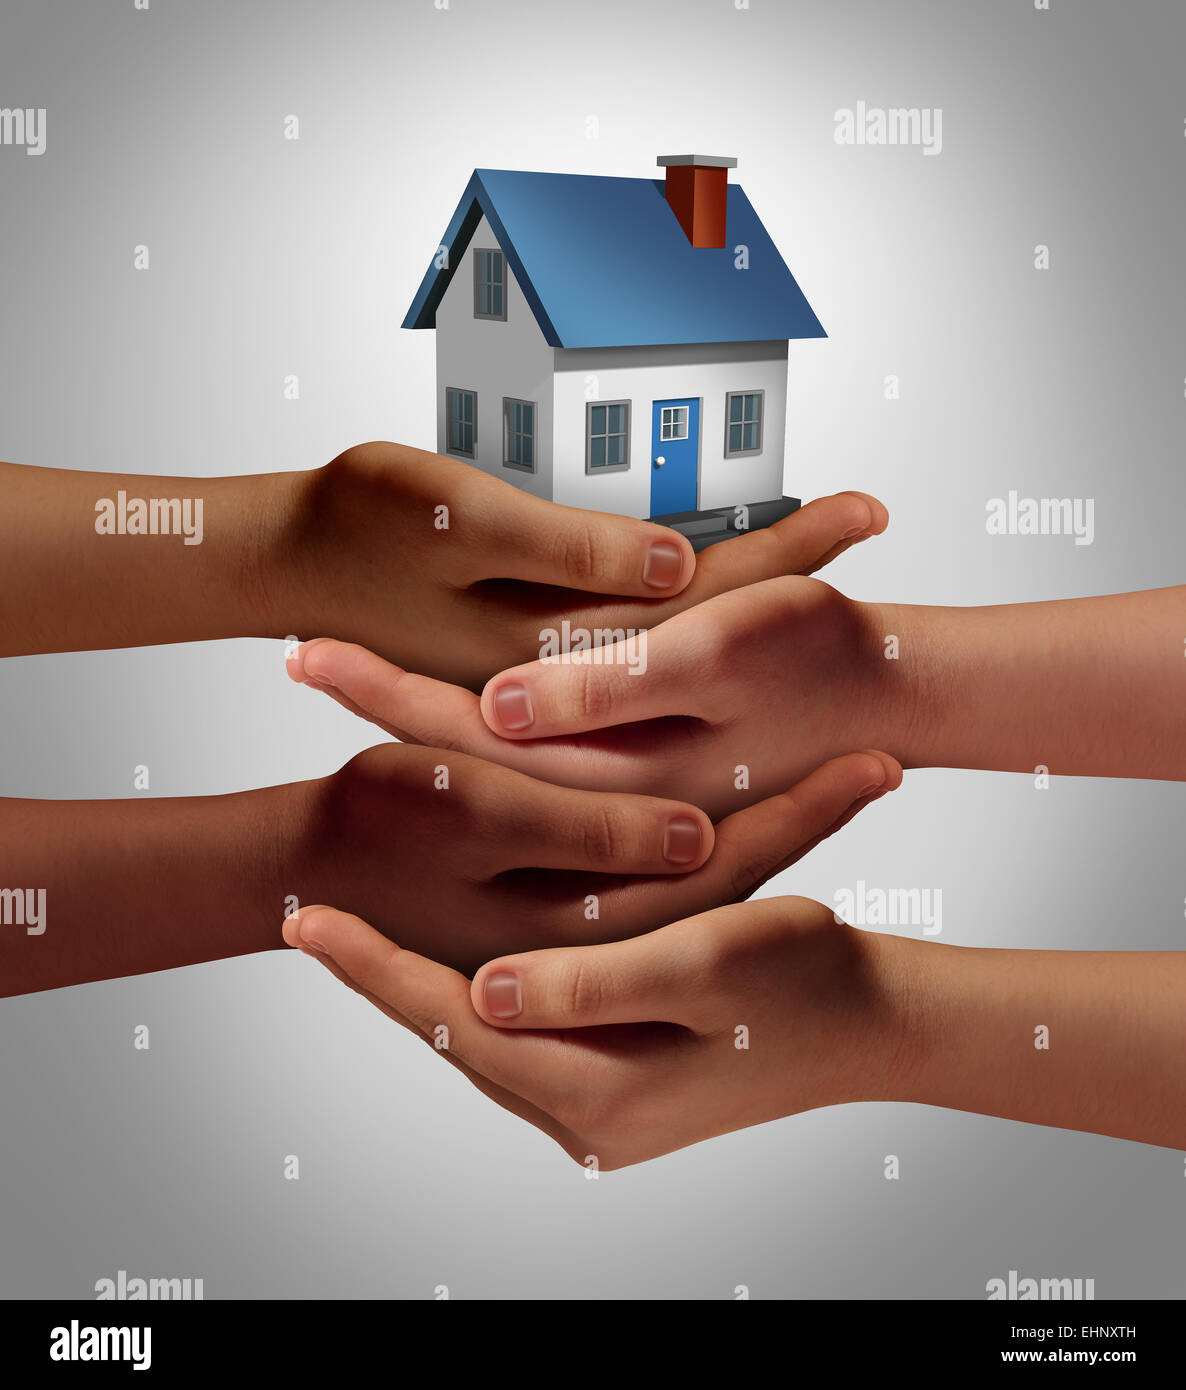 Community housing concept and neighbor support or neighborhood watch symbol as a connected group of diverse hands supporting and holding a family home as a metaphor for friendly residents. Stock Photo